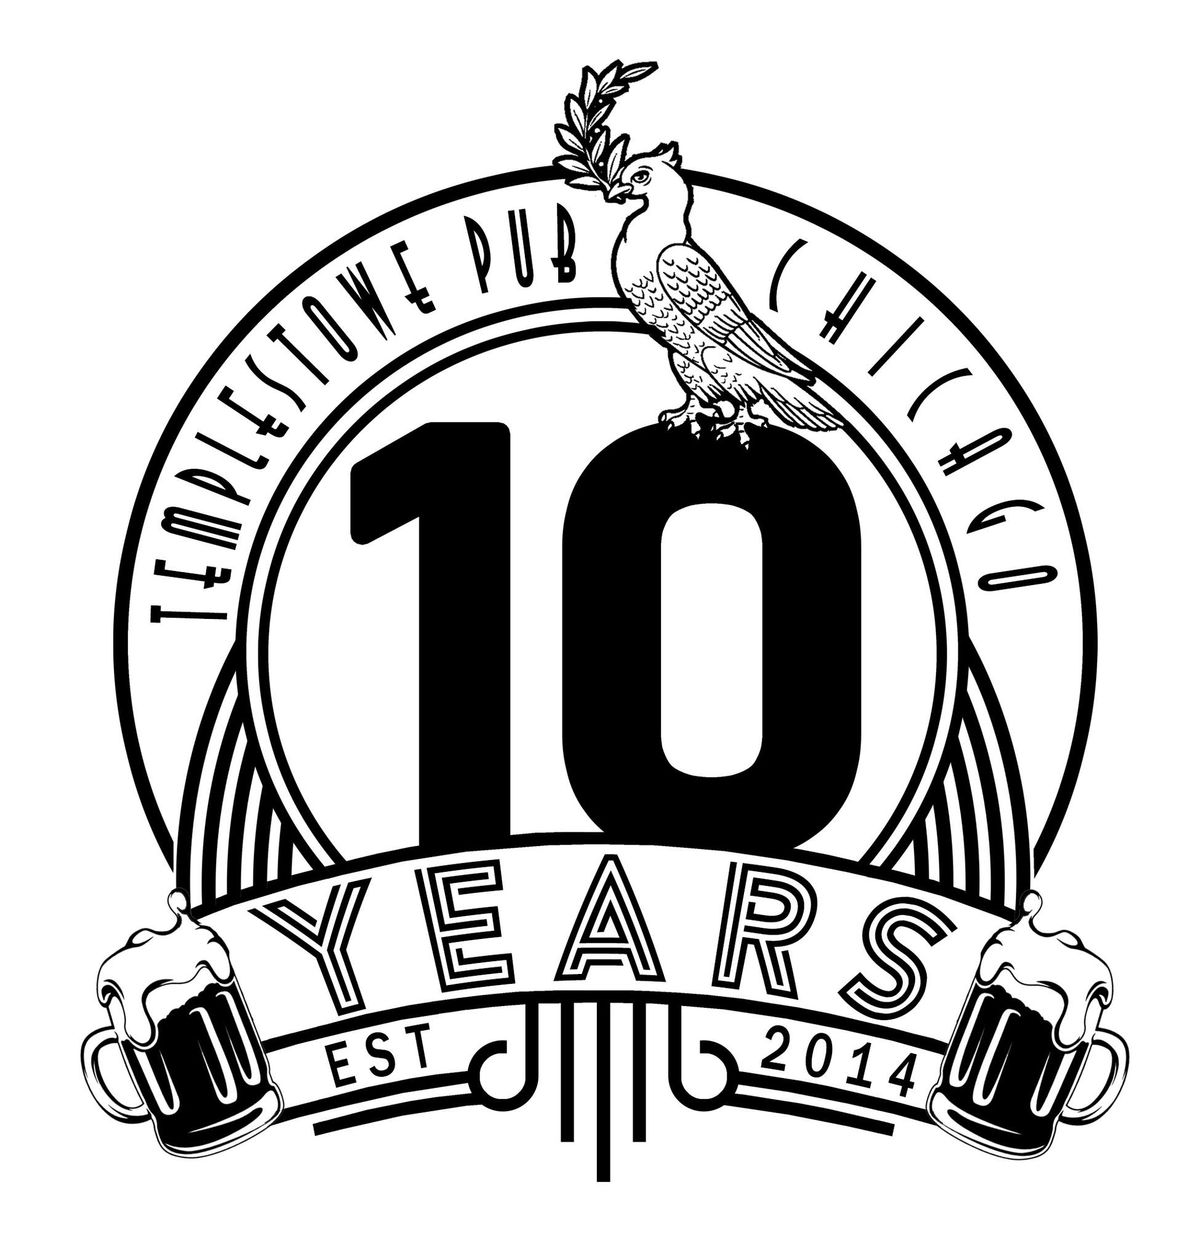 10th Anniversary Party! 